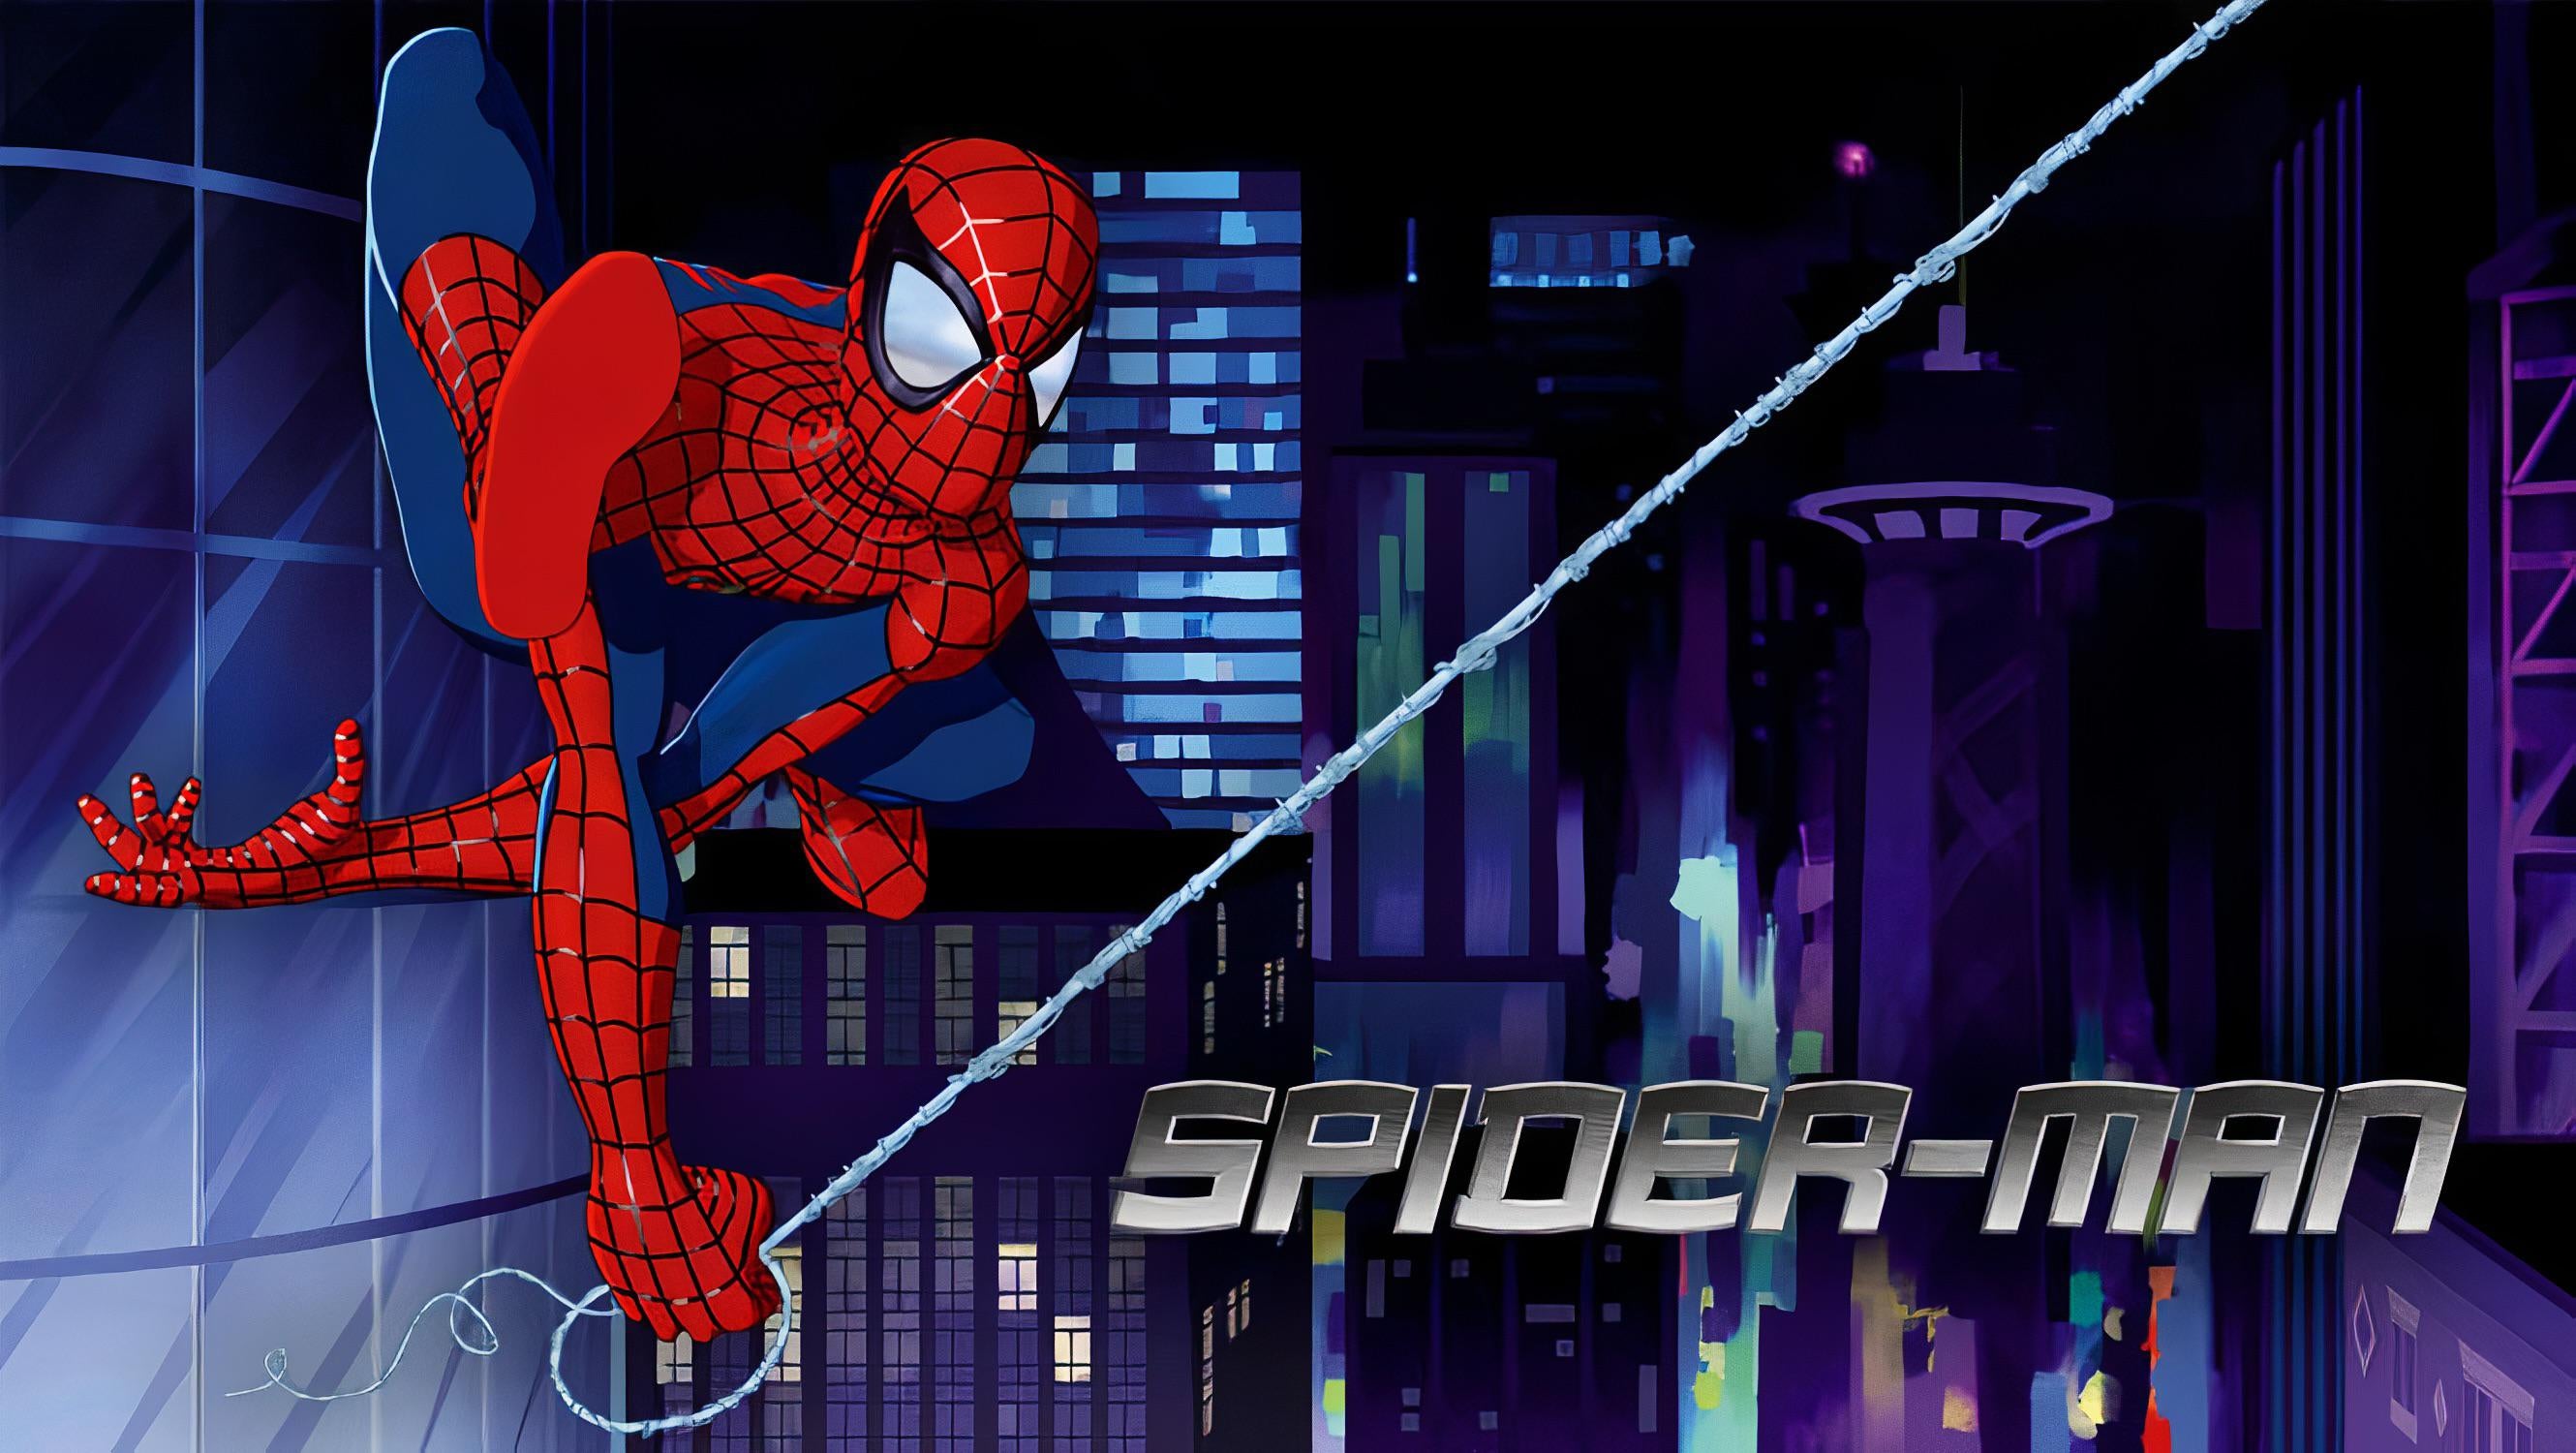 Spider Man: The New Animated Series AI Upscaled Image Wallpaper! Enjoy!